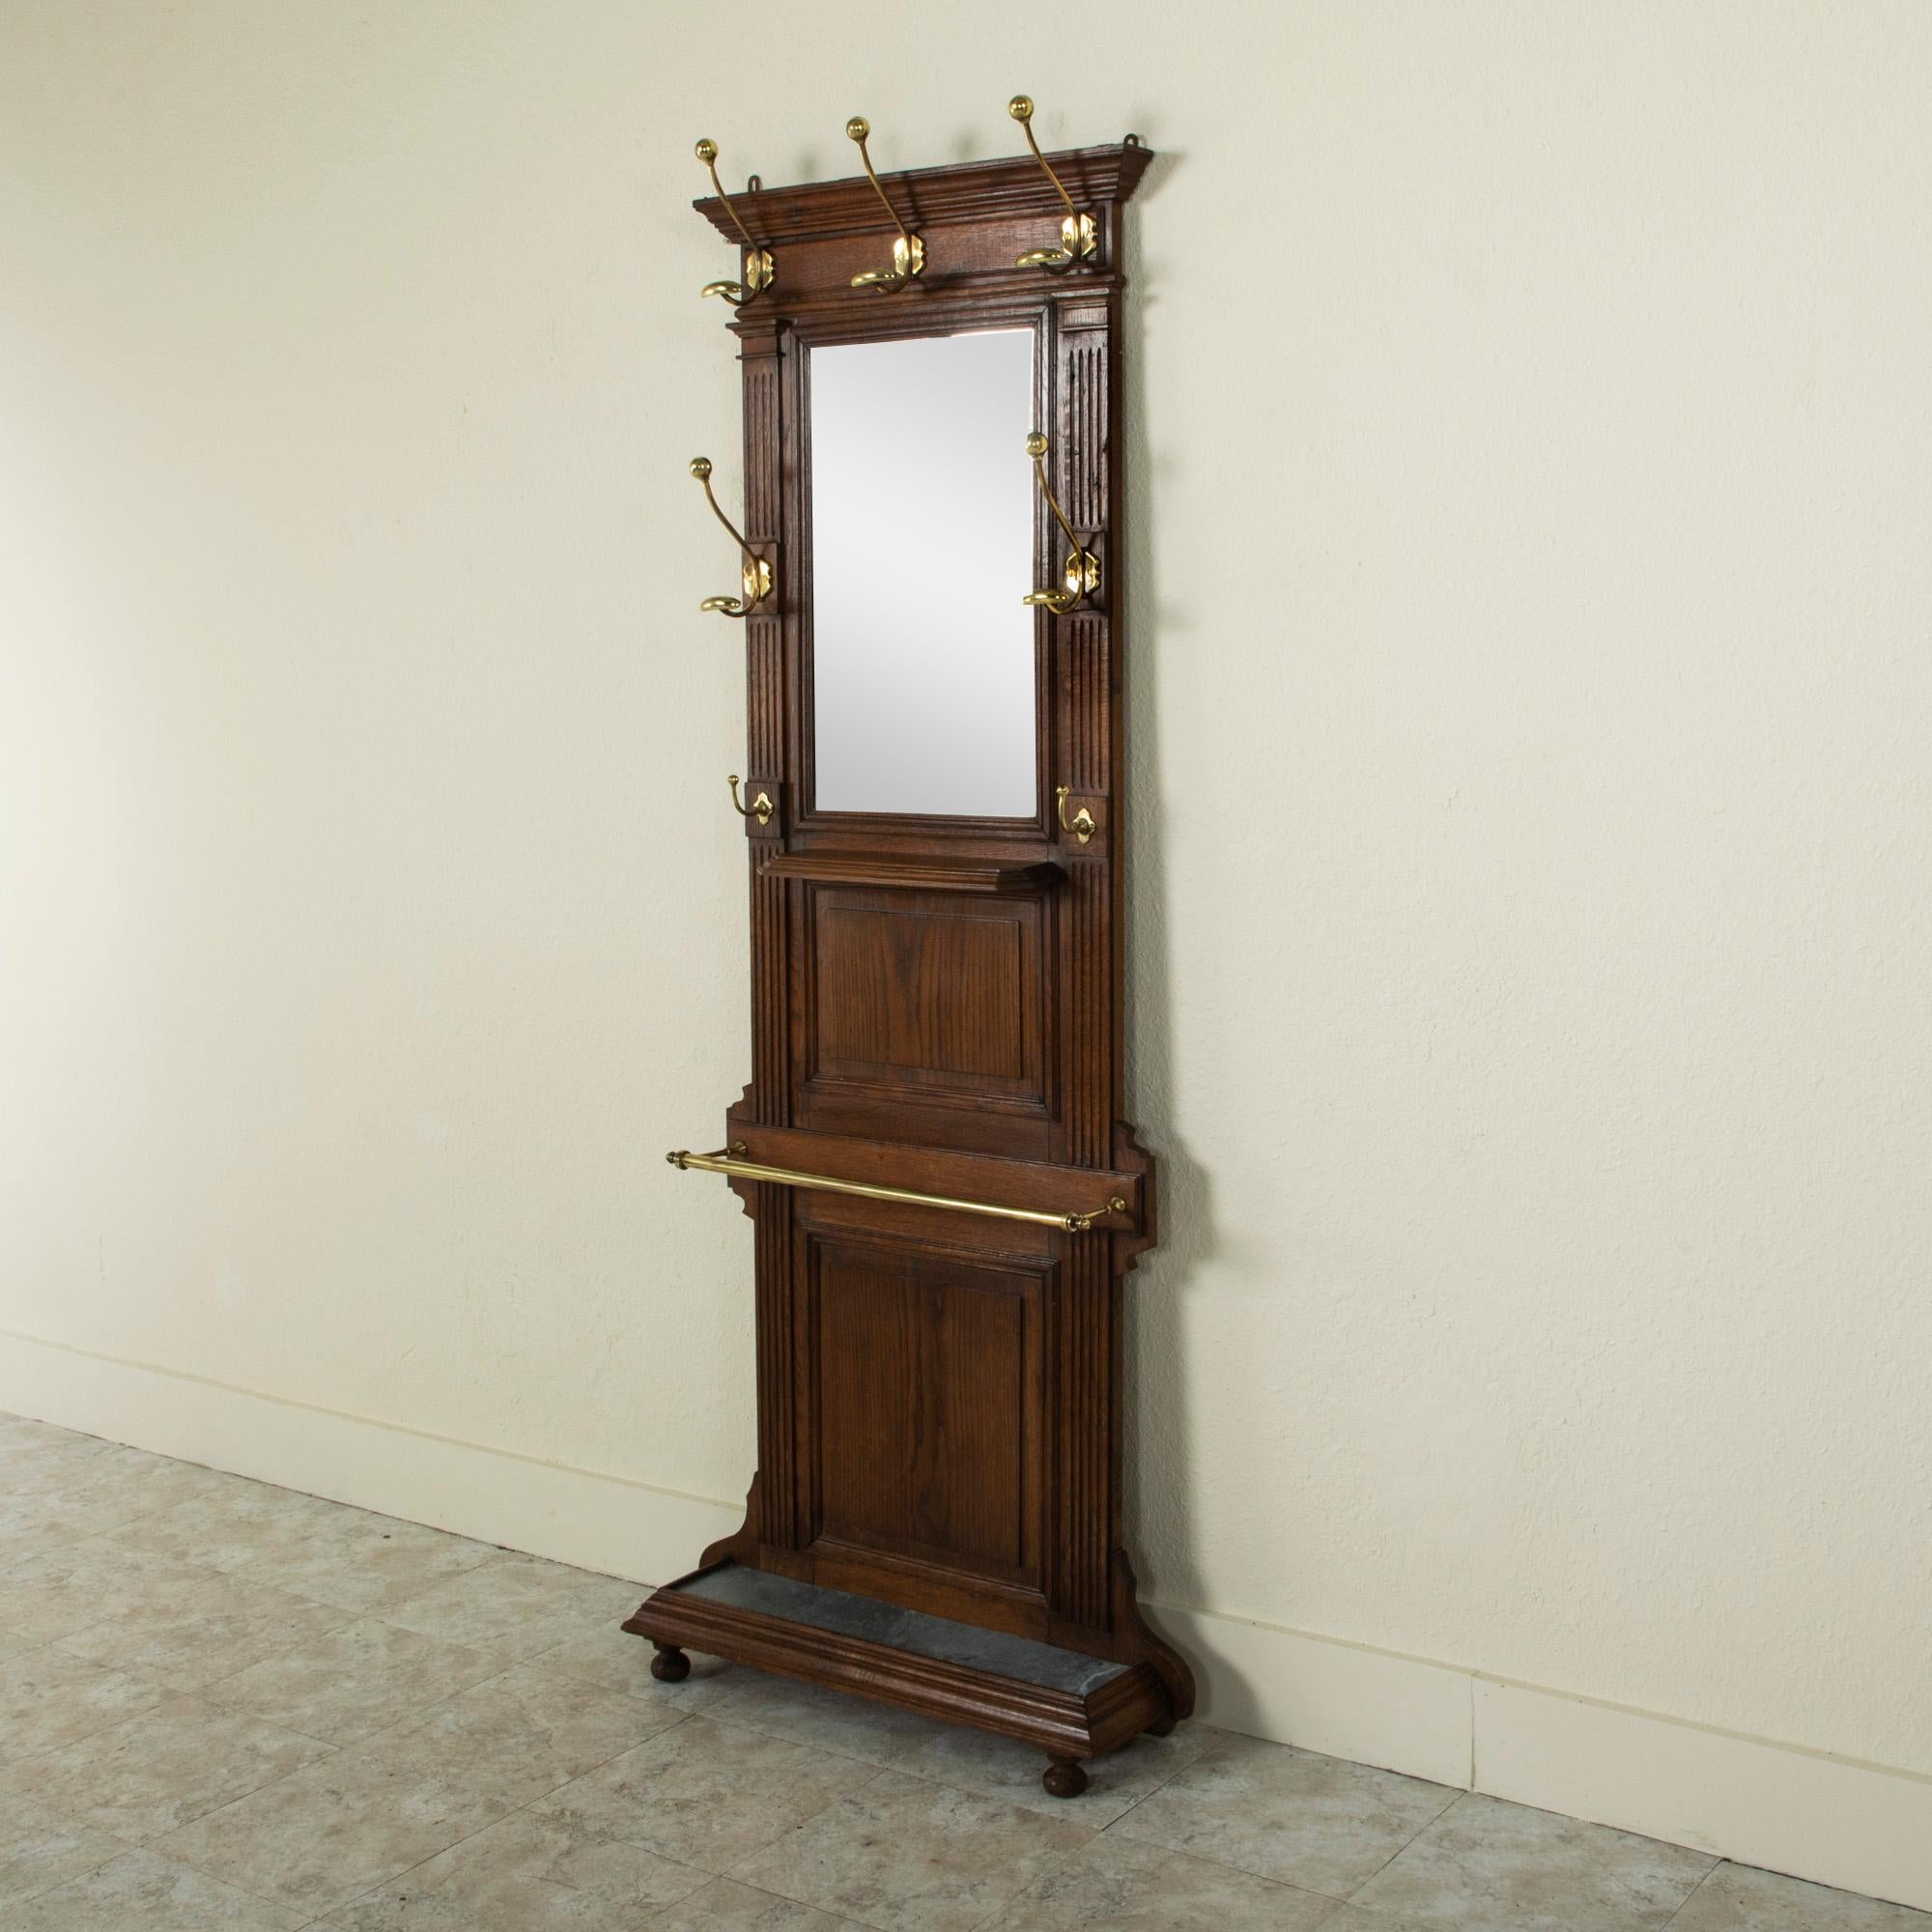 This handsome late nineteenth century Henri II style hall tree is constructed of solid oak with seven bronze hooks and its original beveled mirror. Of a versatile, narrow scale, this piece features an upper row of three hat hooks and two additional